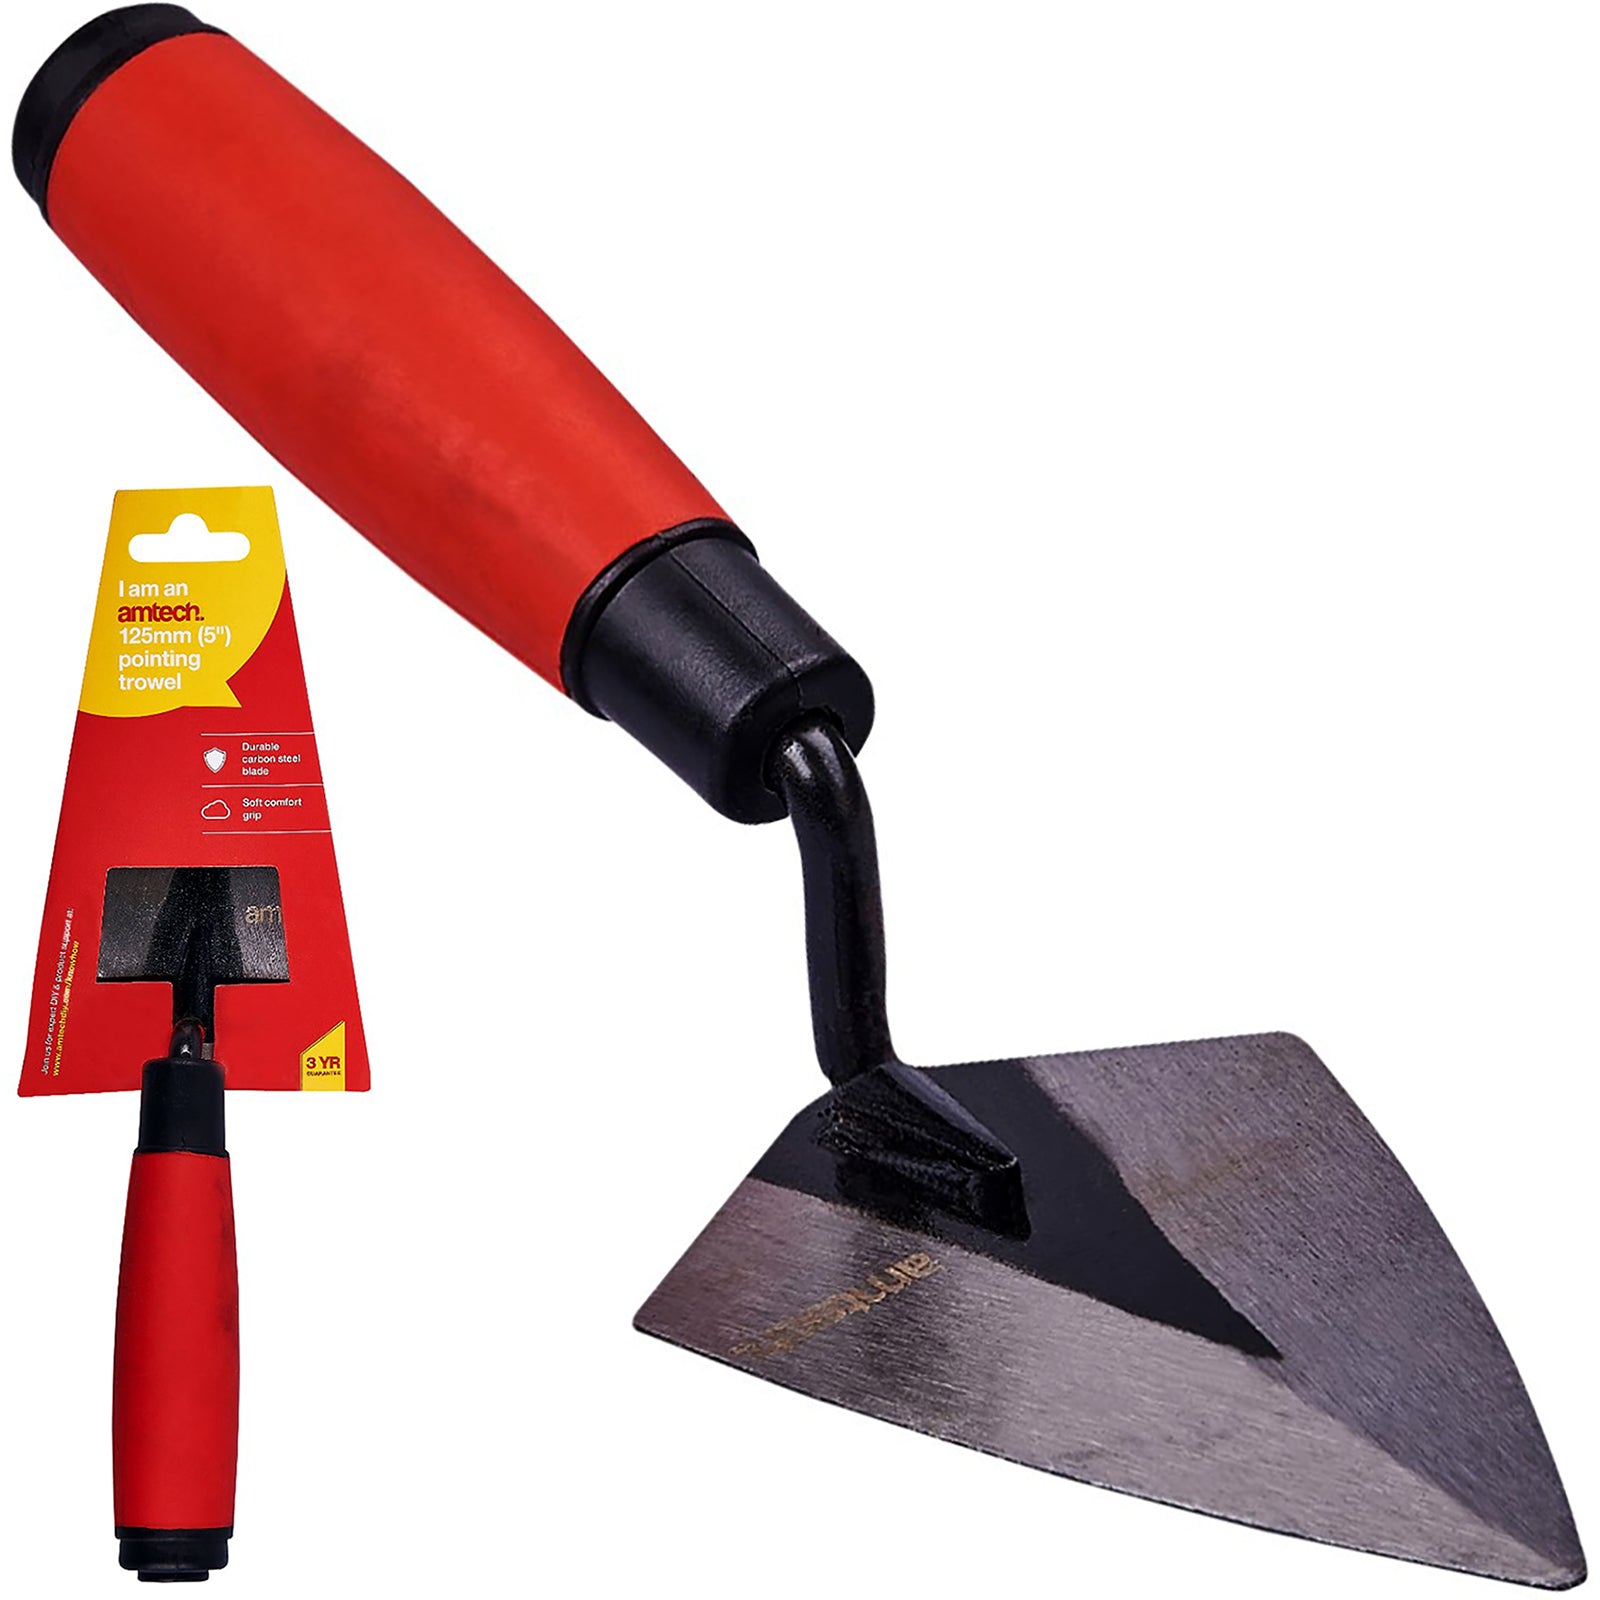 Amtech 125mm (5") Pointing Trowel with Soft Grip Handle